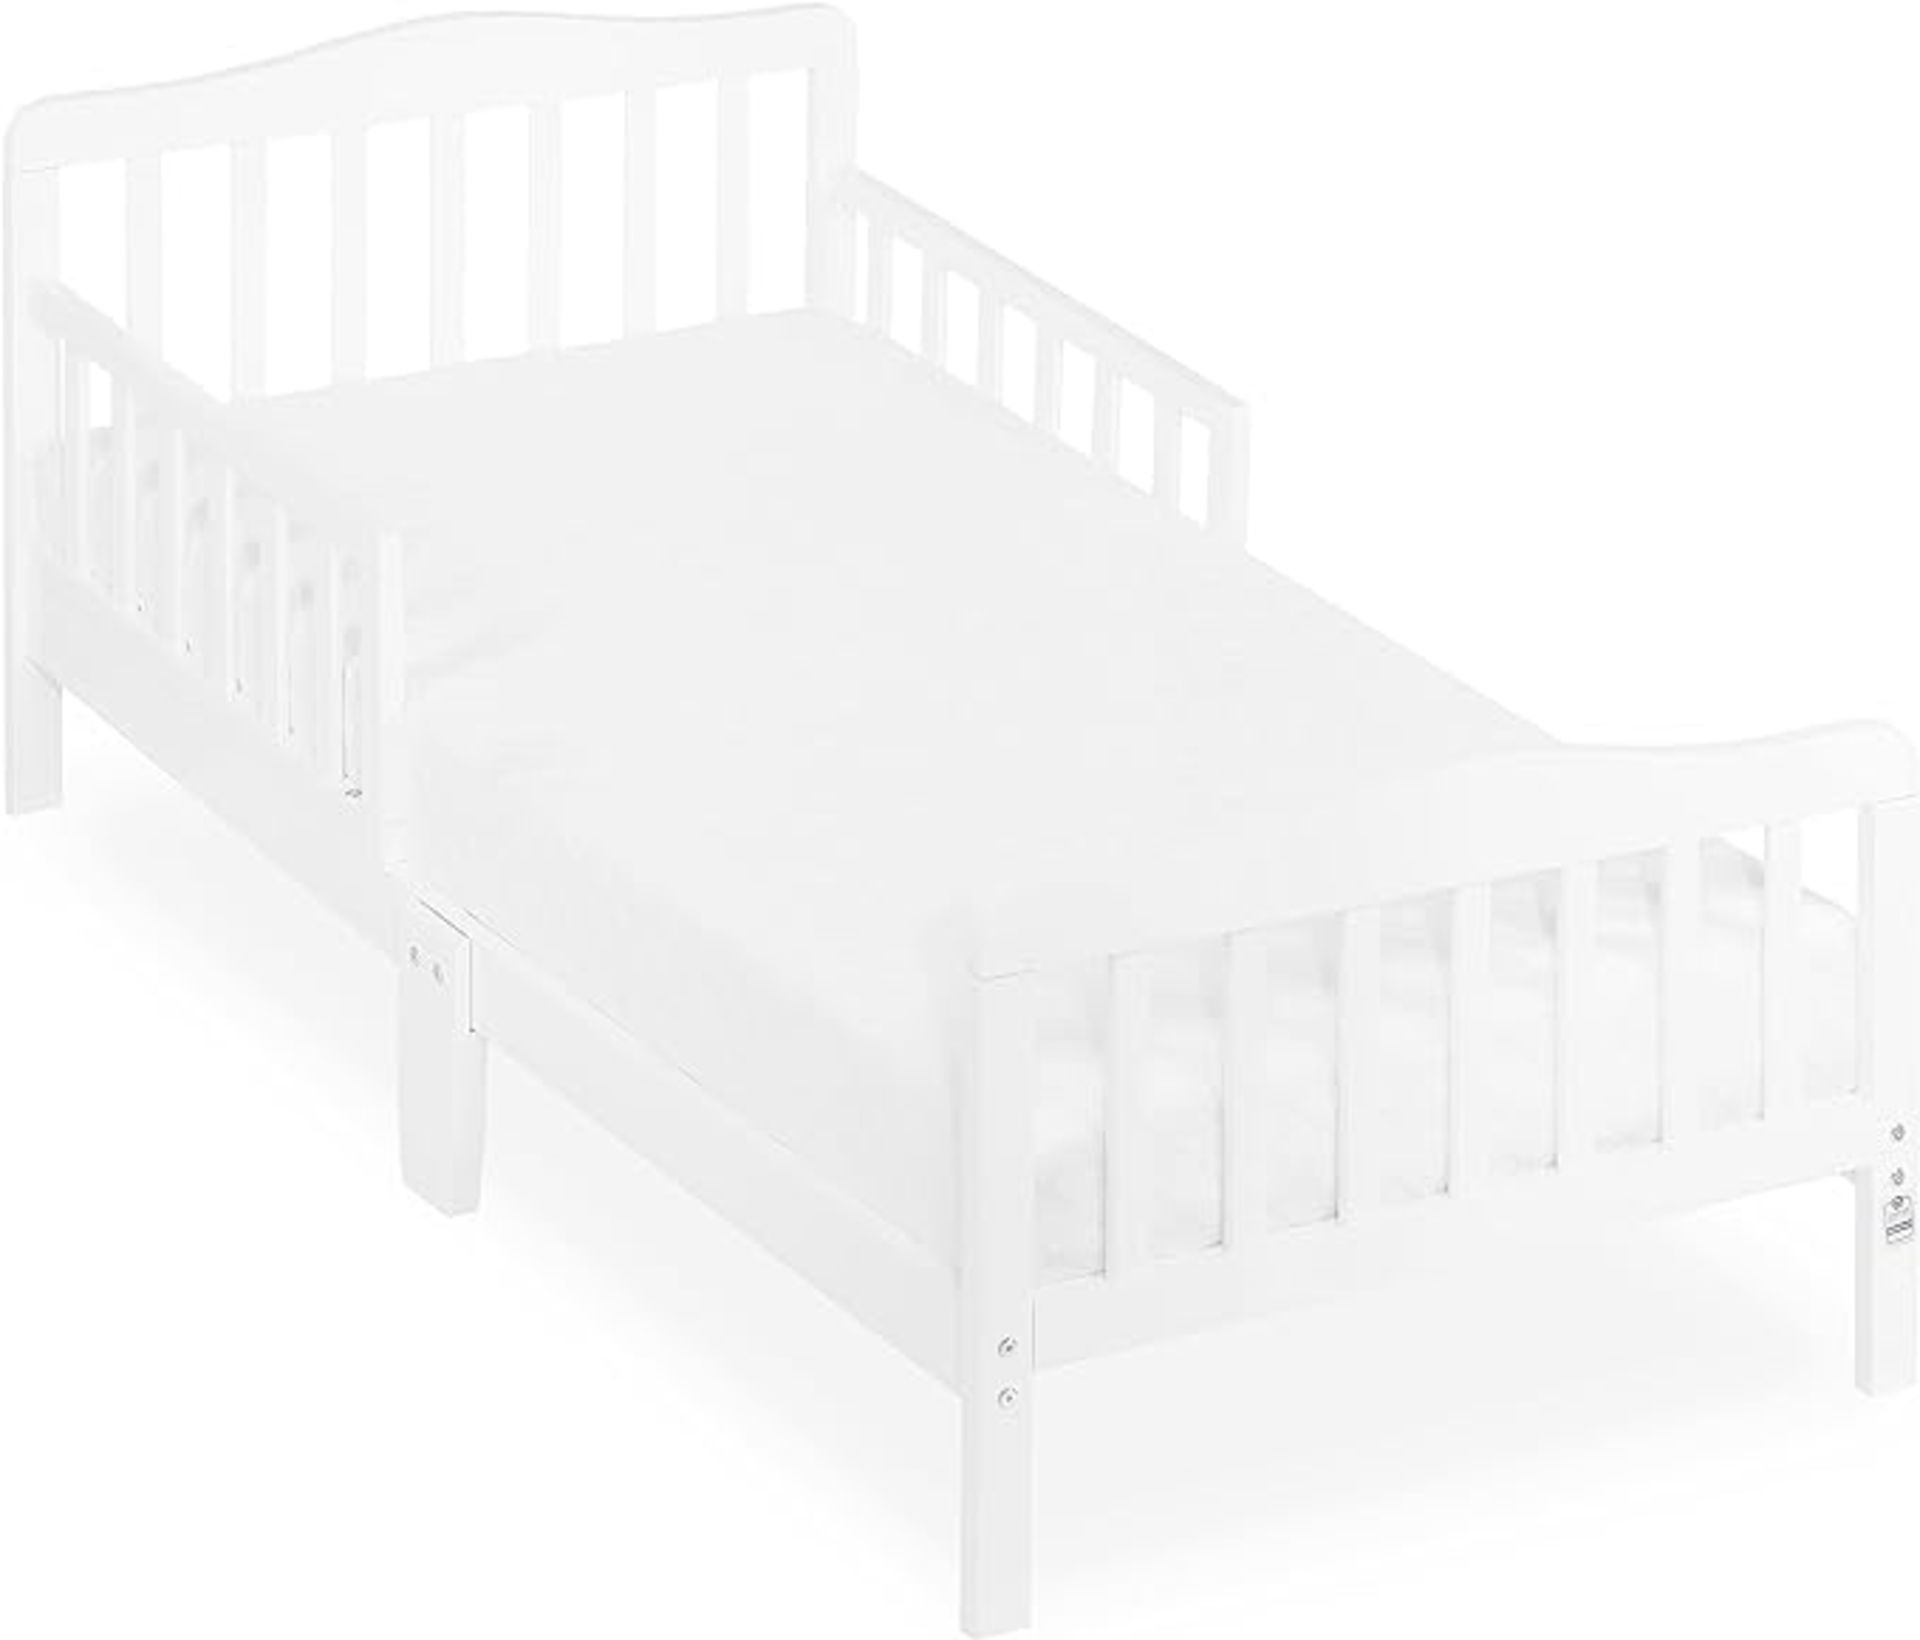 20 X Brand New Dream on Me Classic Toddler BedS. Product dimensionS - 144.8L x 71.1W x 76.2H CM - Image 4 of 4